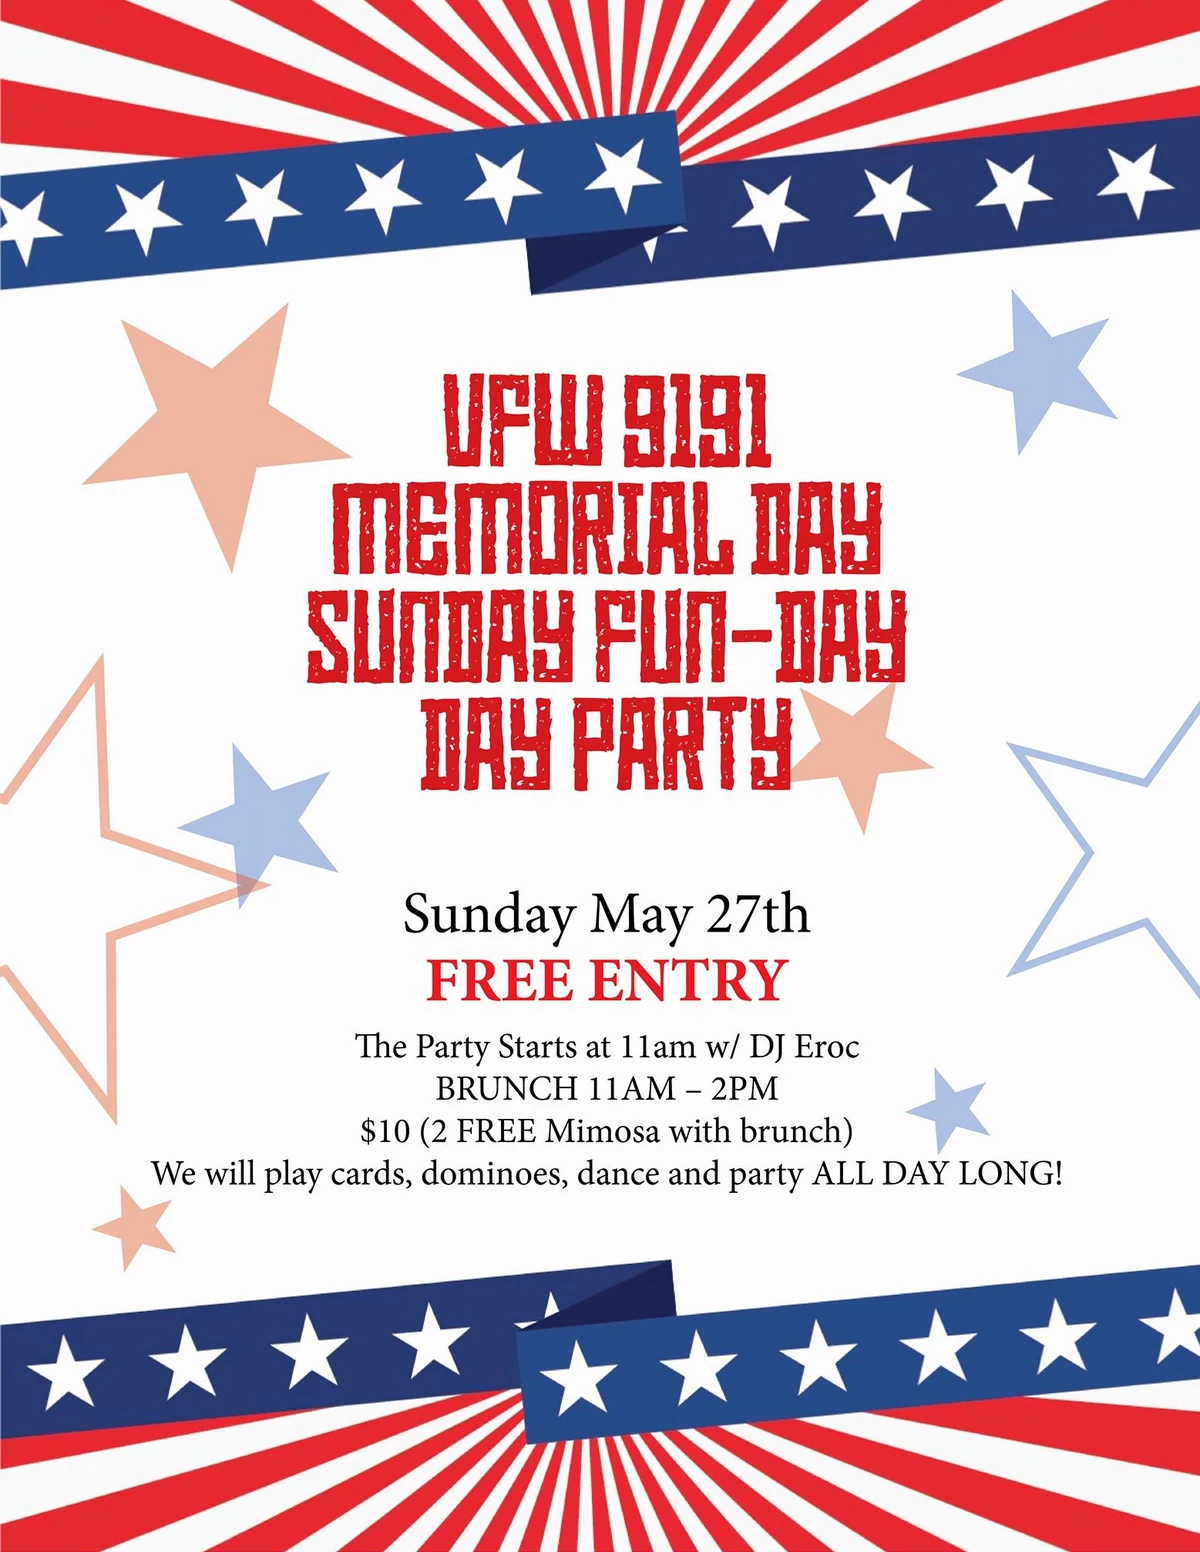 VFW Post 9191 Memorial Day Sunday FunDay Party